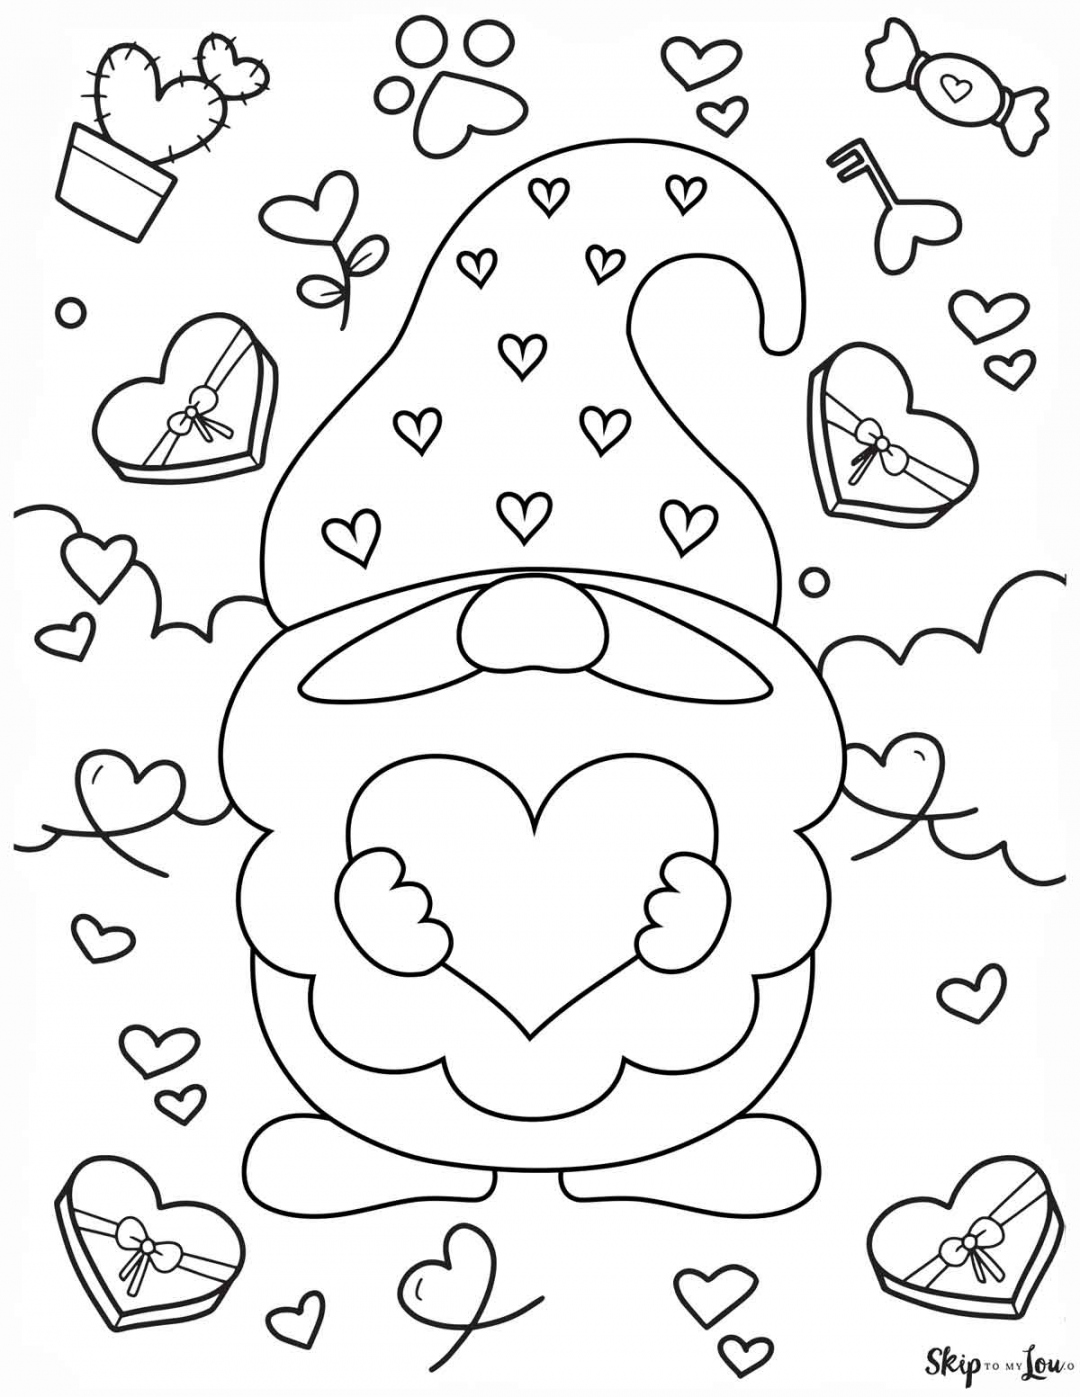 Valentine Coloring Pages Free Printable - Printable - The BEST free Valentines Day Coloring Pages  Skip To My Lou